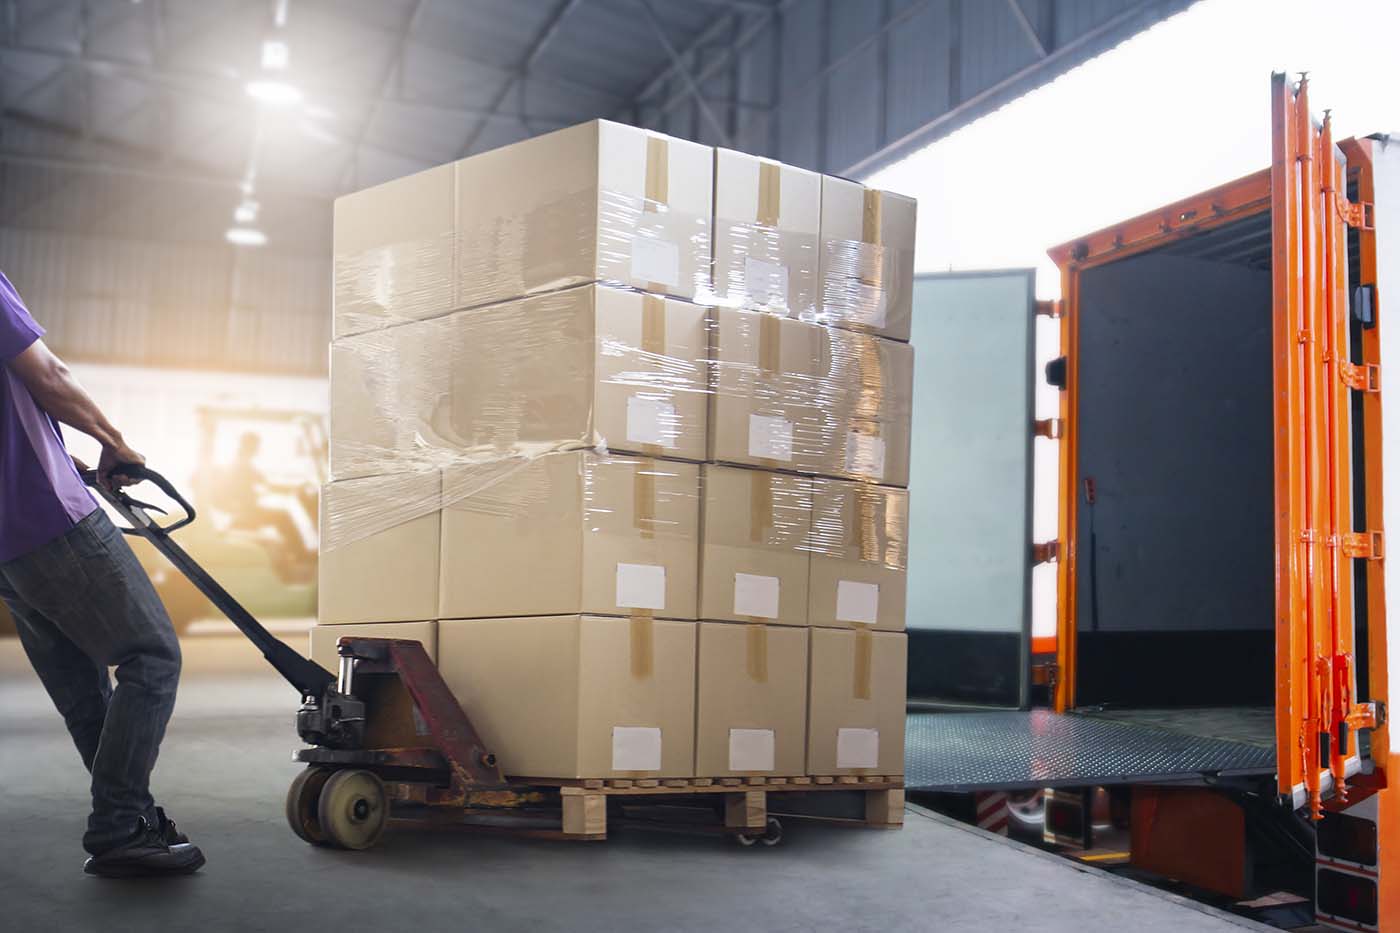 Worker Courier Unloading Package Box Out Of Cargo Container. Delivery service. Truck Loading at Dock Warehouse. Shipments. Shipping Warehouse Logistics and Transportation.